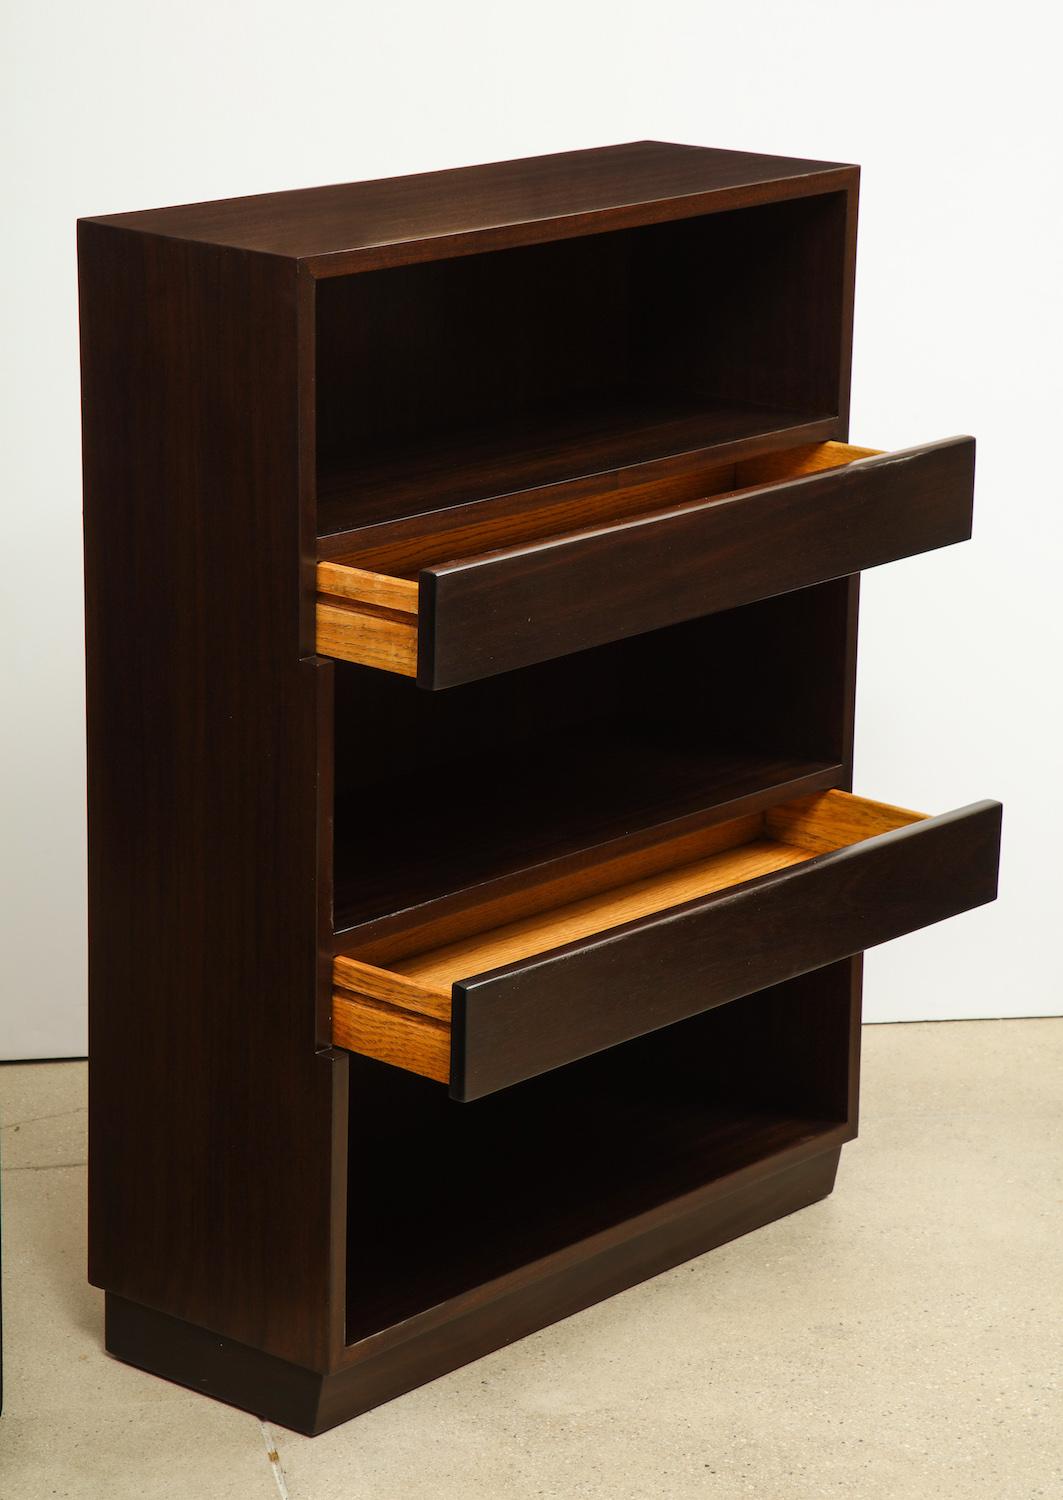 By Edward Wormley for Dunbar. Dark stained mahogany bookcases that step-up as they ascend. 2 drawers separate the three open storage areas. Each one is signed with the Dunbar label.